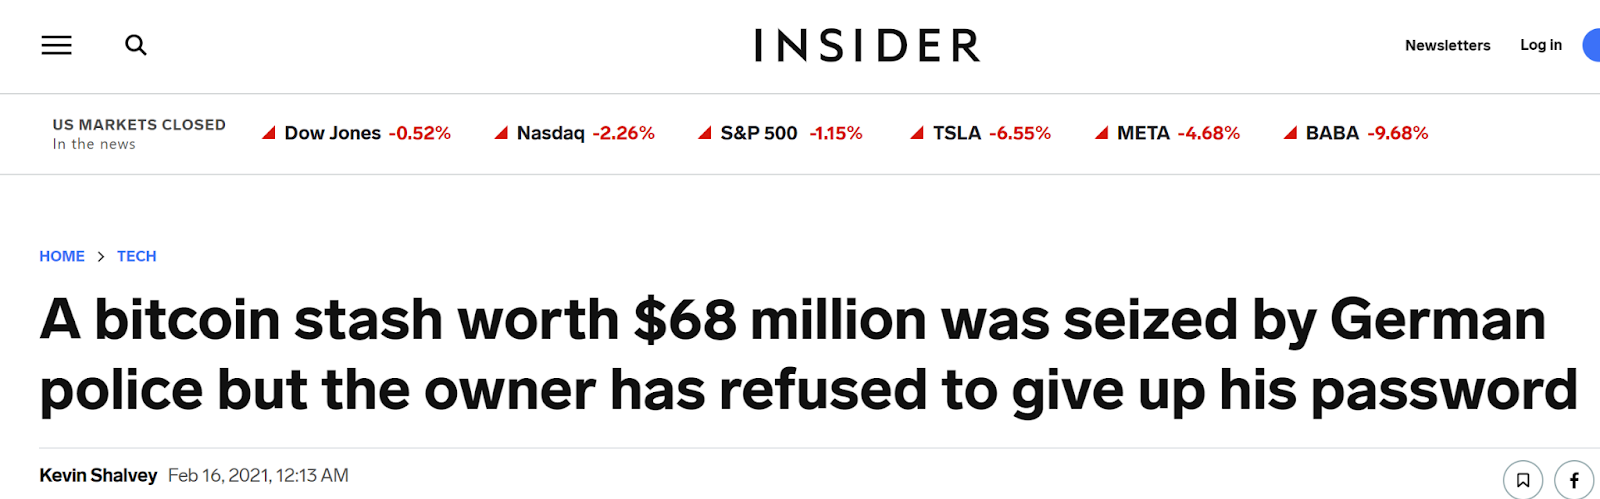 business-insider.png